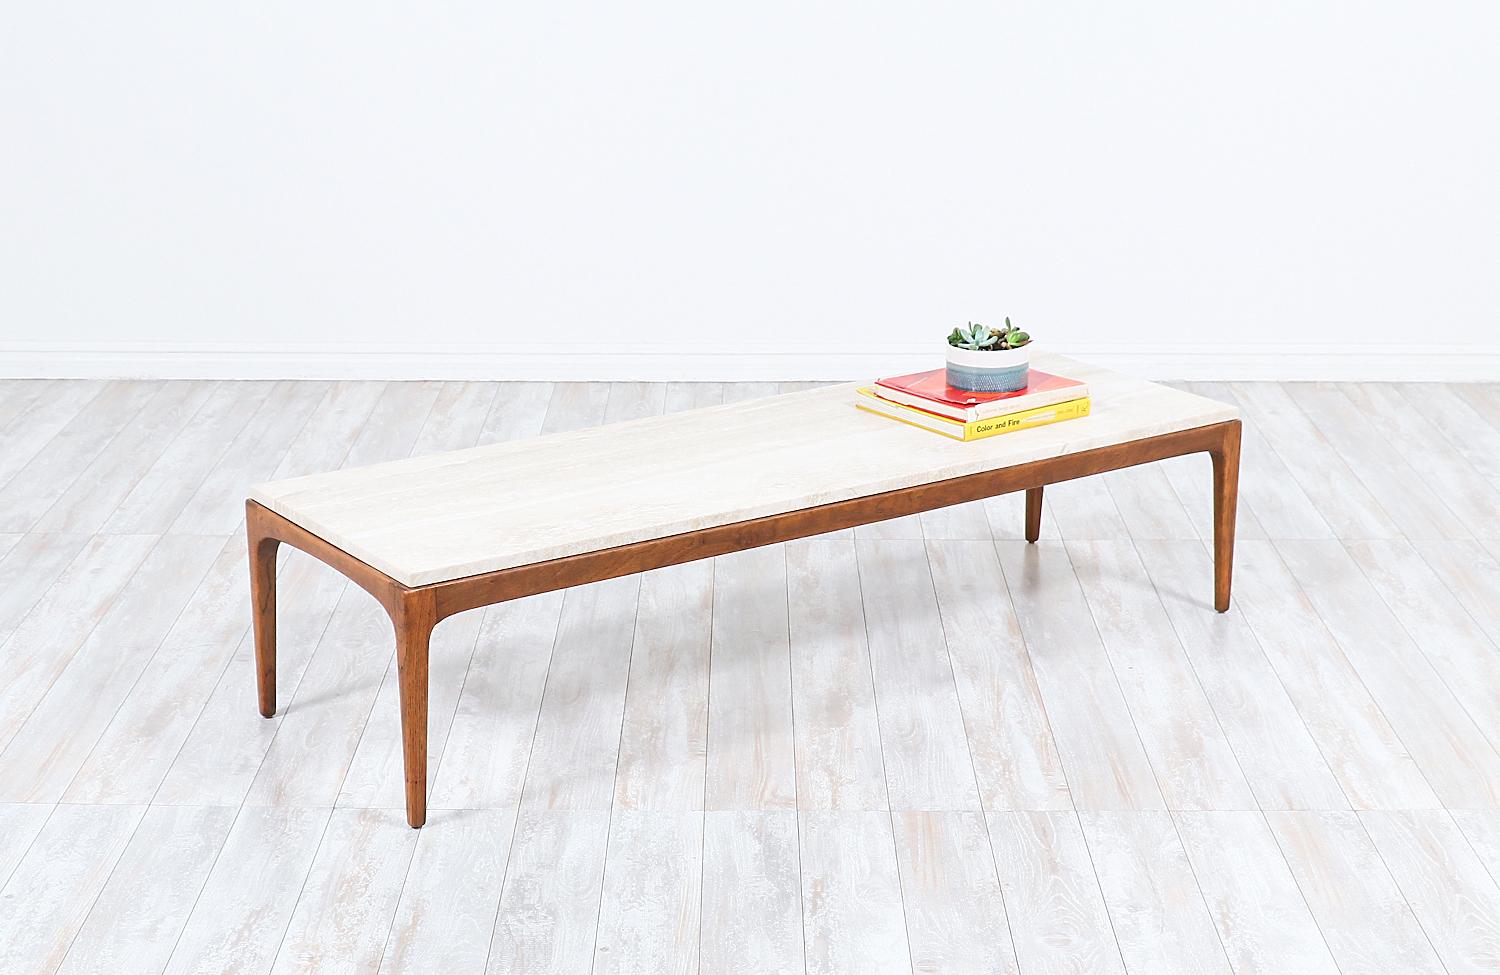 American Mid-Century Modern “Rythm” Coffee Table with Crema Marfil Marble Top by Lane